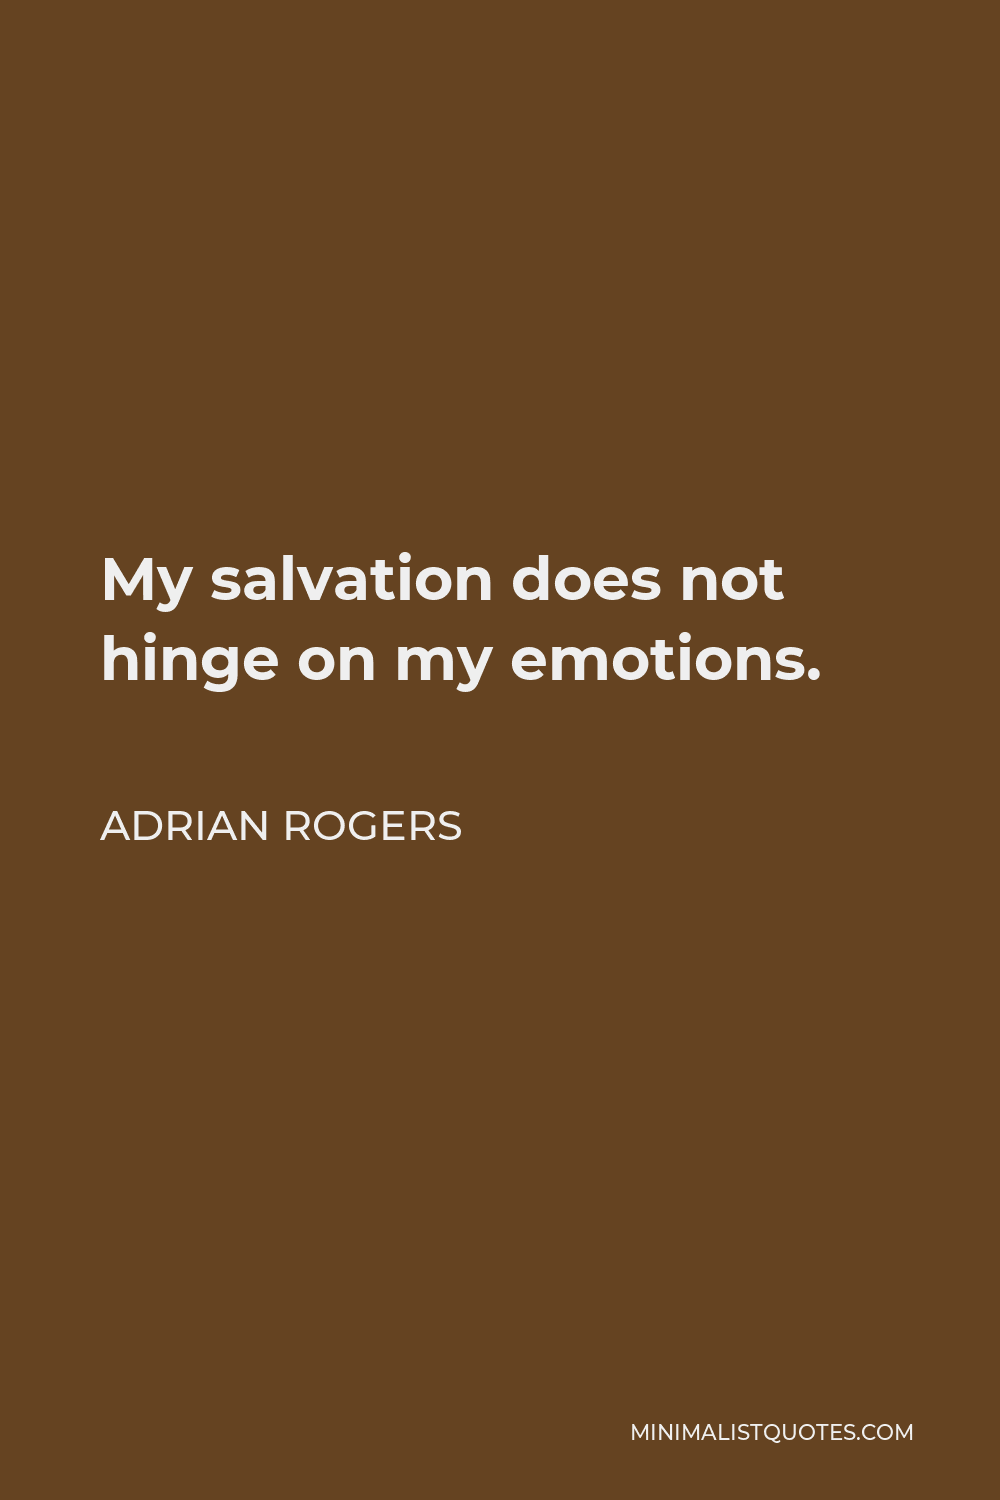 Adrian Rogers Quote - My salvation does not hinge on my emotions.